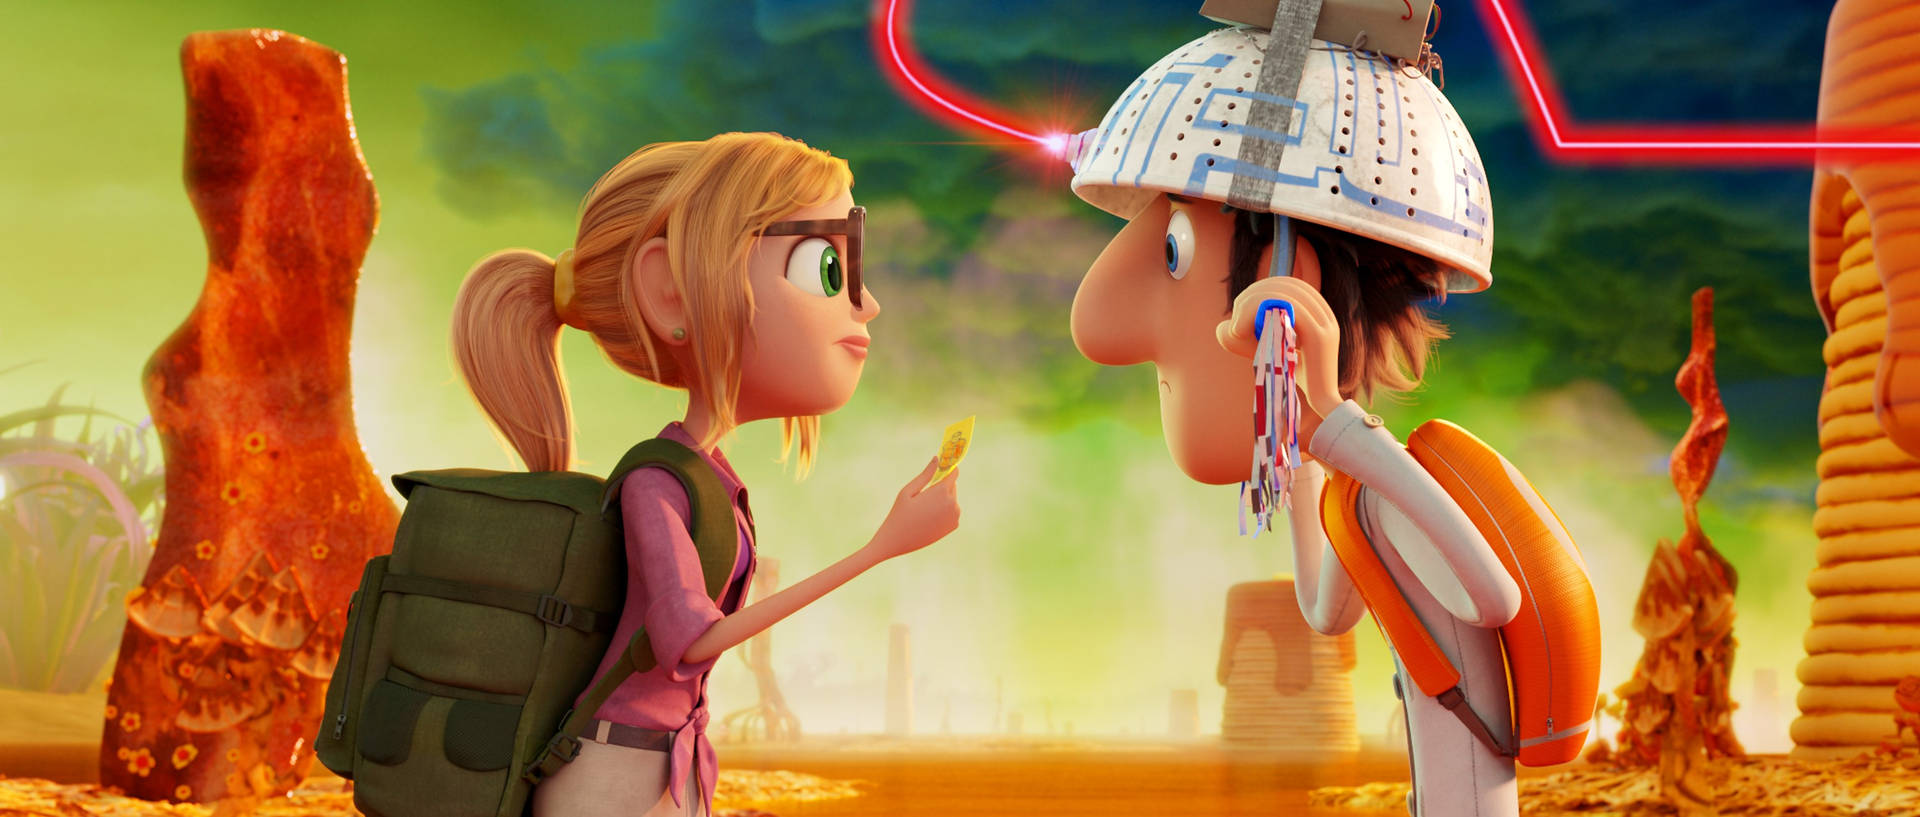 Flint And Sam Cloudy With A Chance Of Meatballs 2 Wallpaper